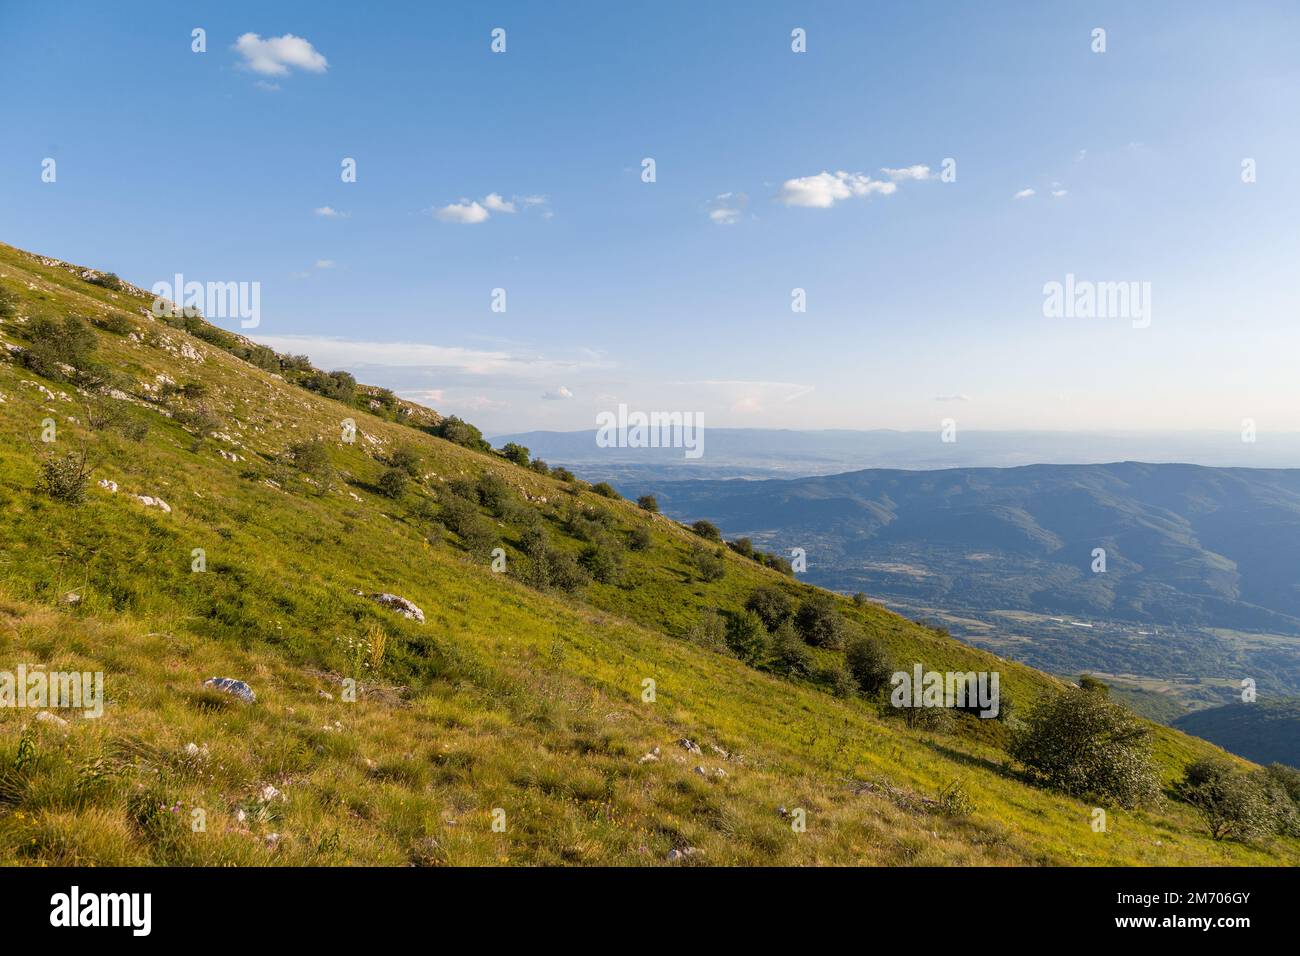 Slopes around the mountain with low grass and karst rocks Stock Photo